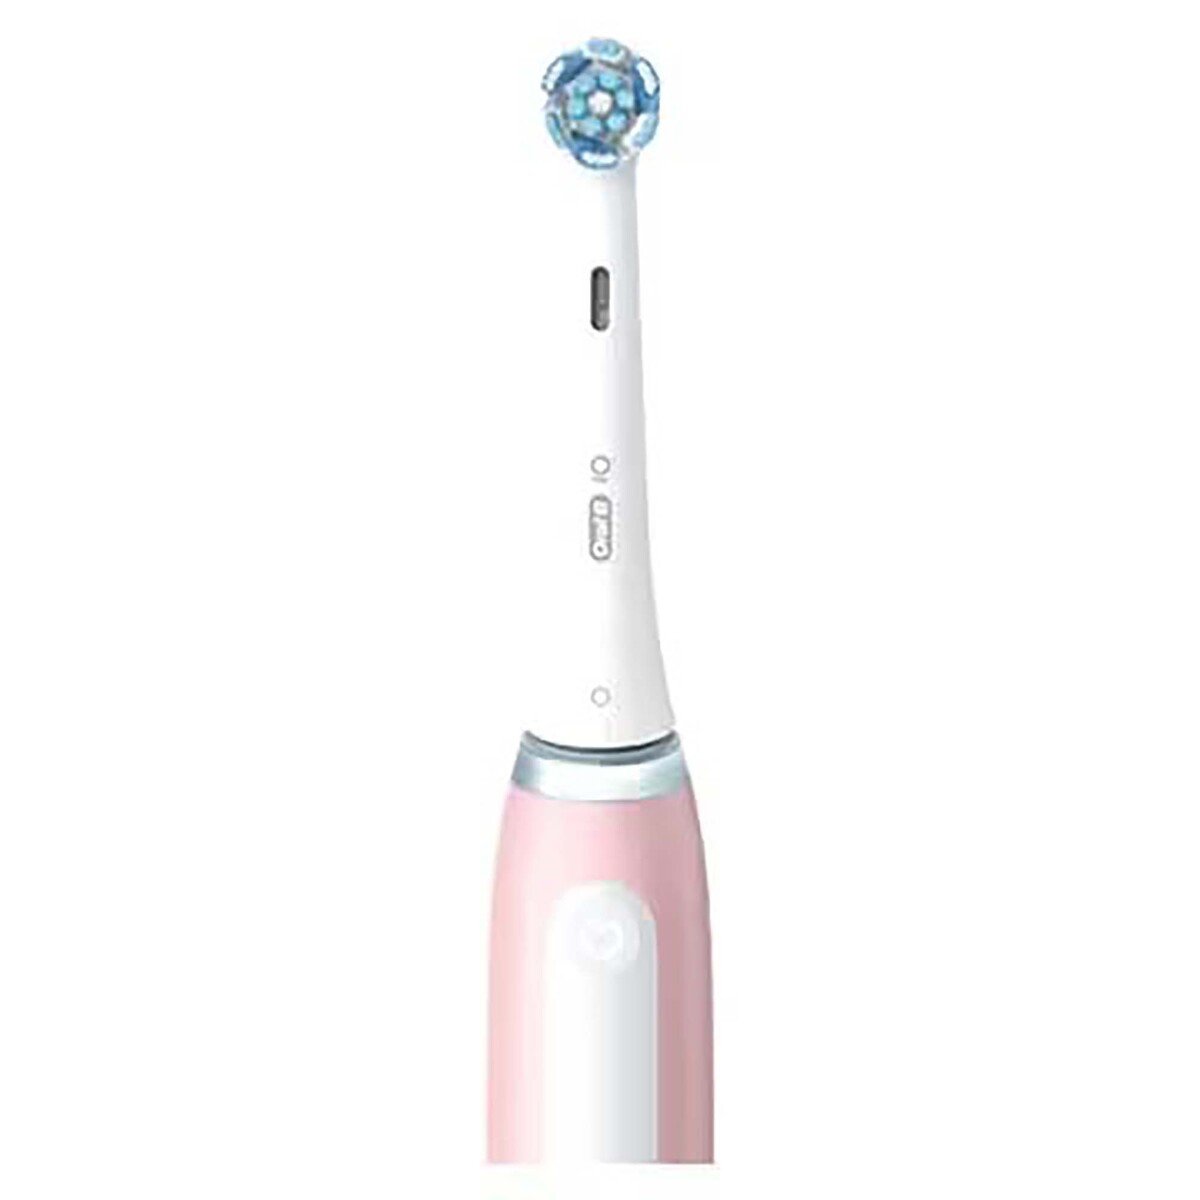 Oral-B iO Series 3 Rechargeable Toothbrush iOG3.1A6.0 Pink